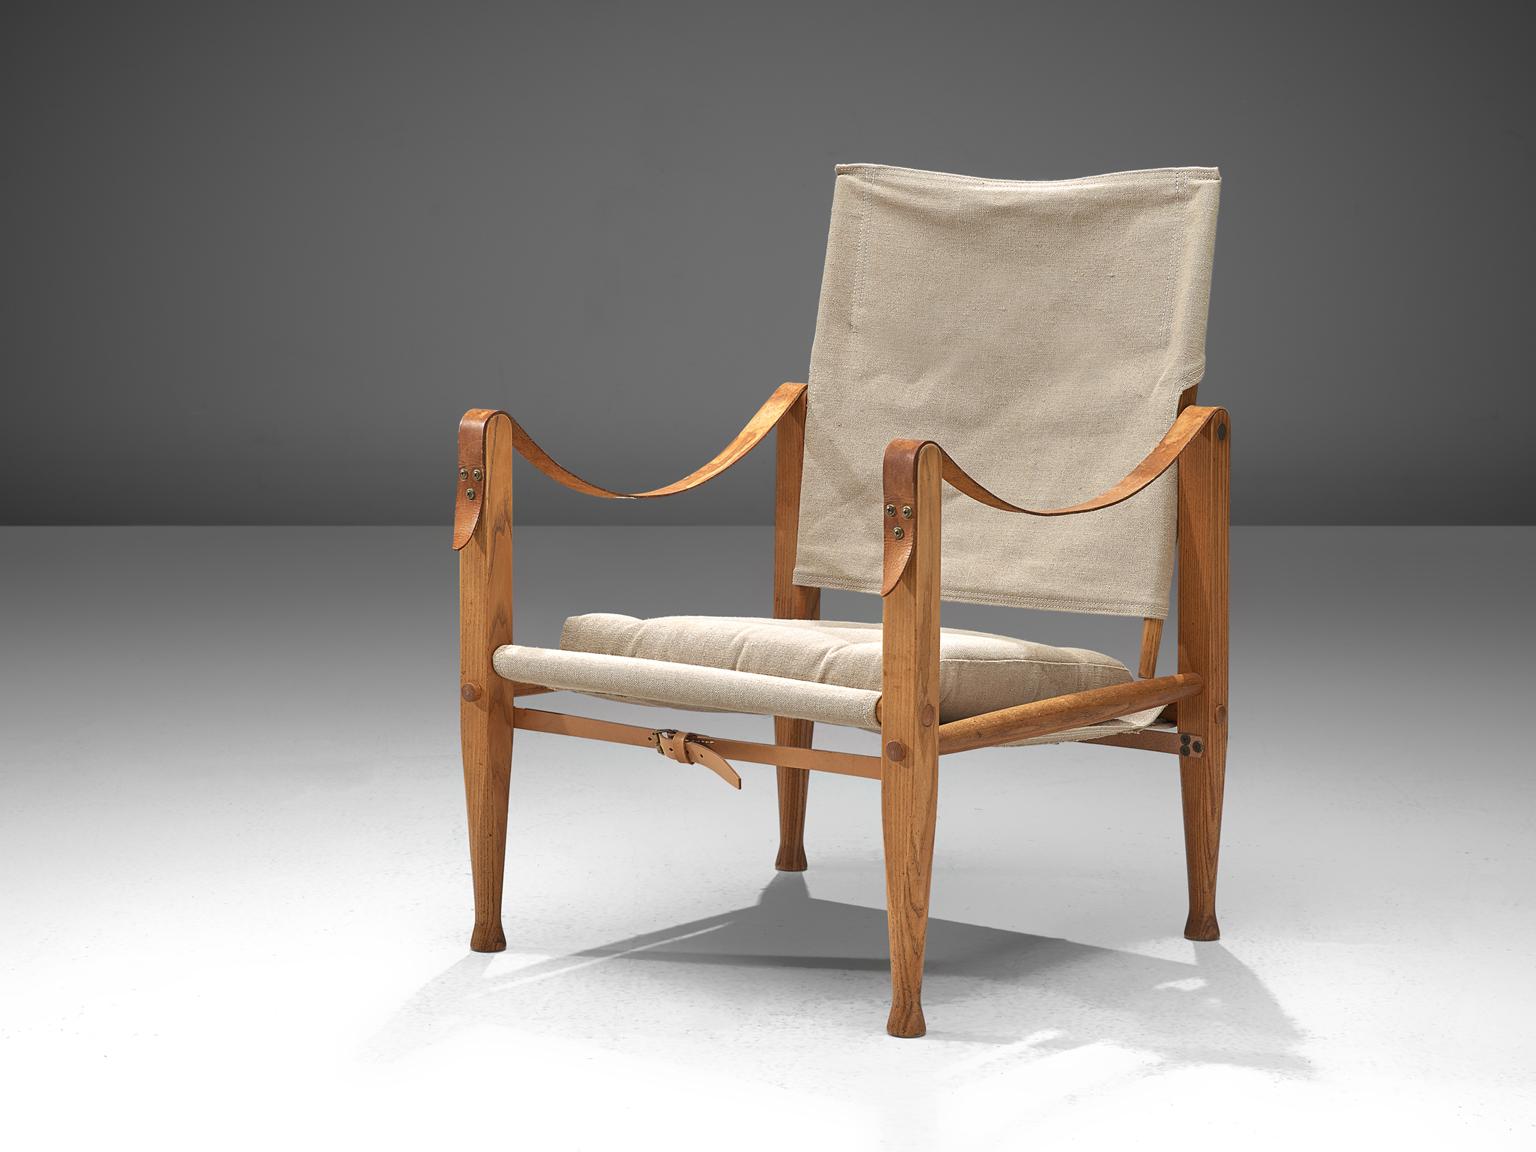 Kaare Klint for Rud Rasmussen, Safari chair with cushion, ash wood, leather and undyed linen, Denmark, design 1933.

Stunning safari lounge chair designed by Kaare Klint for Rud Rasmussen. Covered with its original upholstery, this specific model